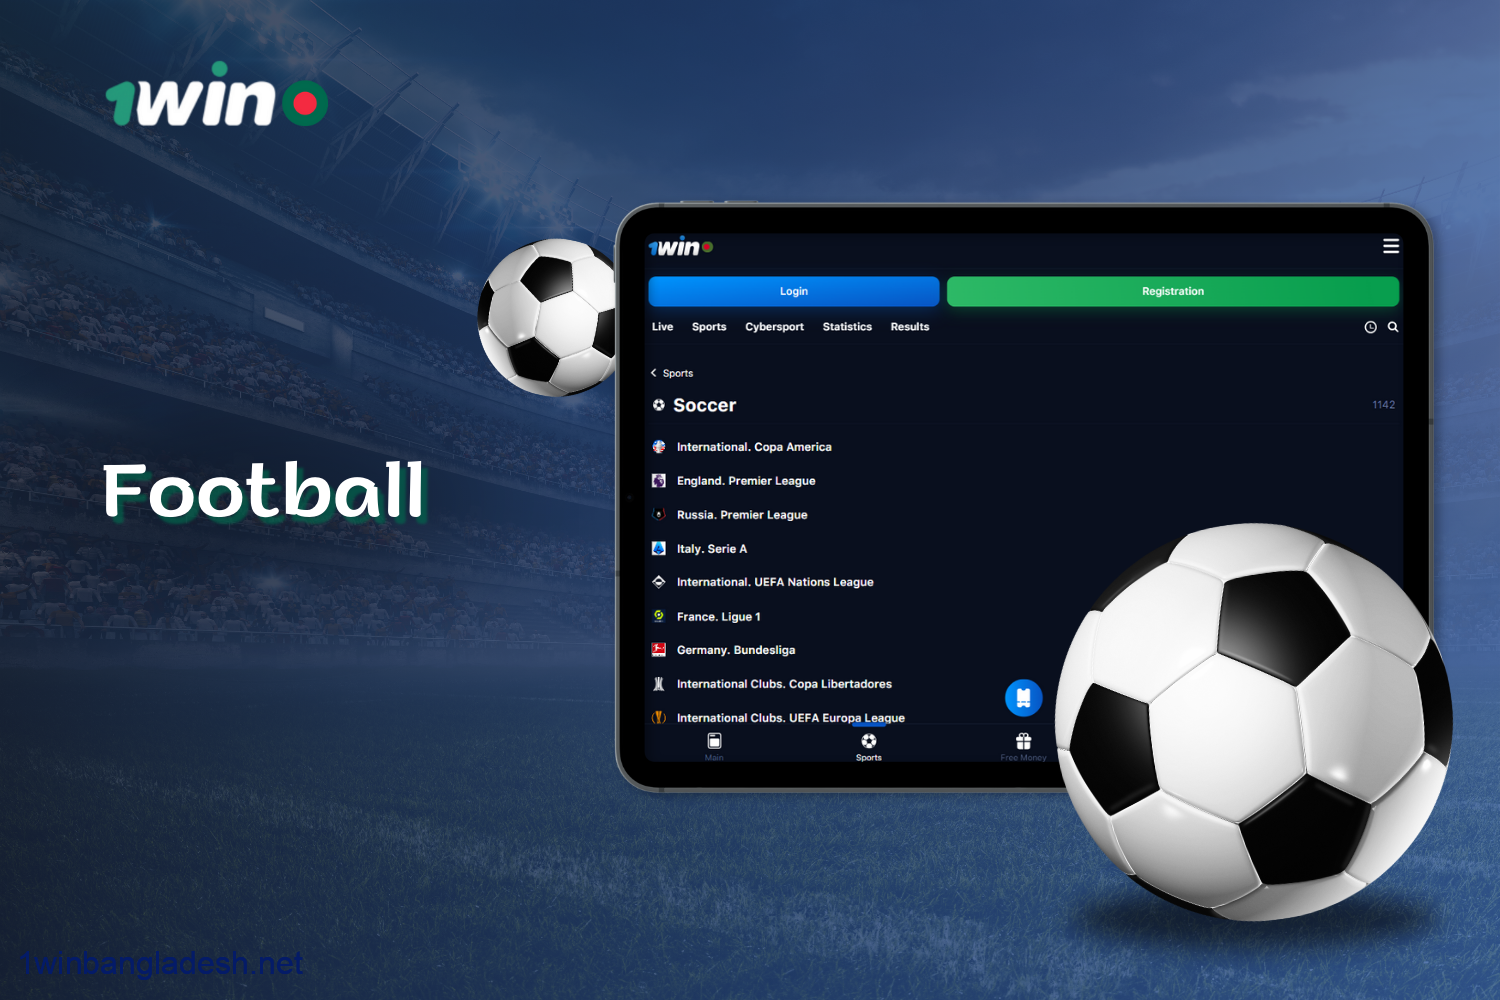 1win offers Bangladeshi players wide range of Football betting options in the Sports section